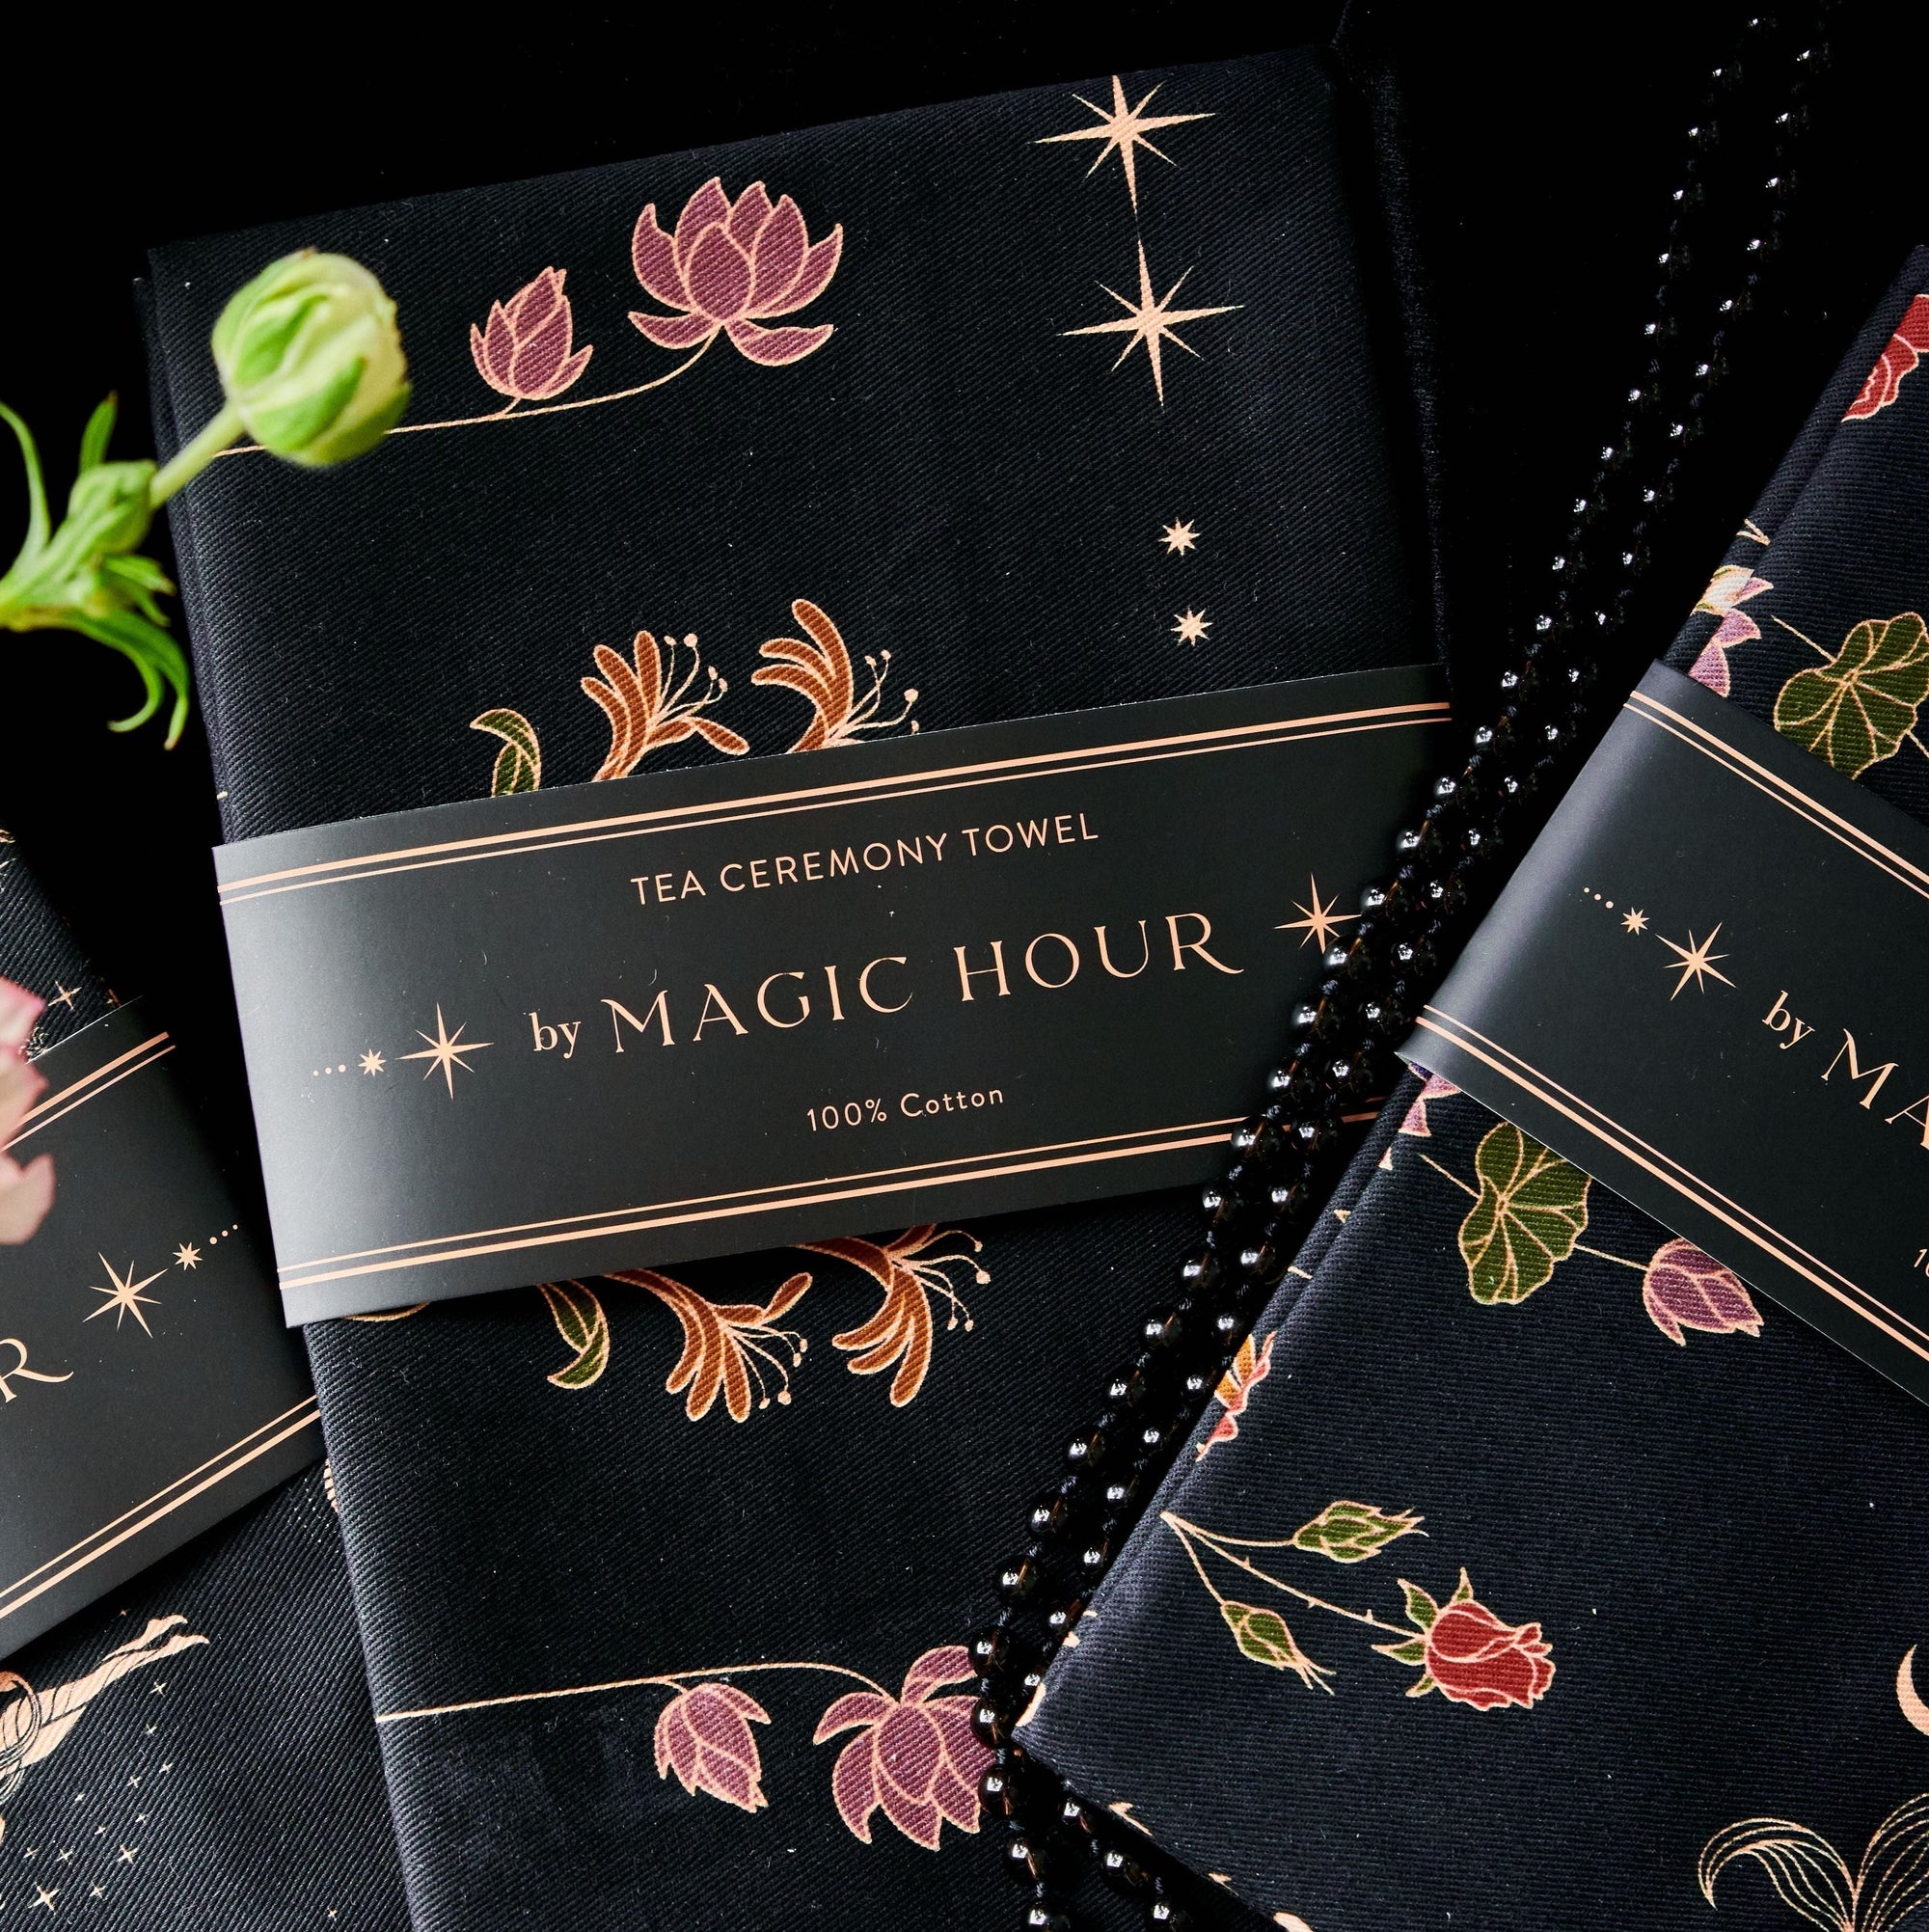 A close-up of the Tea Ceremony Towels Bundle by Magic Hour with floral and star patterns in gold and colorful designs. One towel is partially unwrapped, revealing its delicate design. Perfect for any Magic Hour Tea ritual, the packaging reads "TEA CEREMONY TOWELS BUNDLE by MAGIC HOUR 100% Cotton.